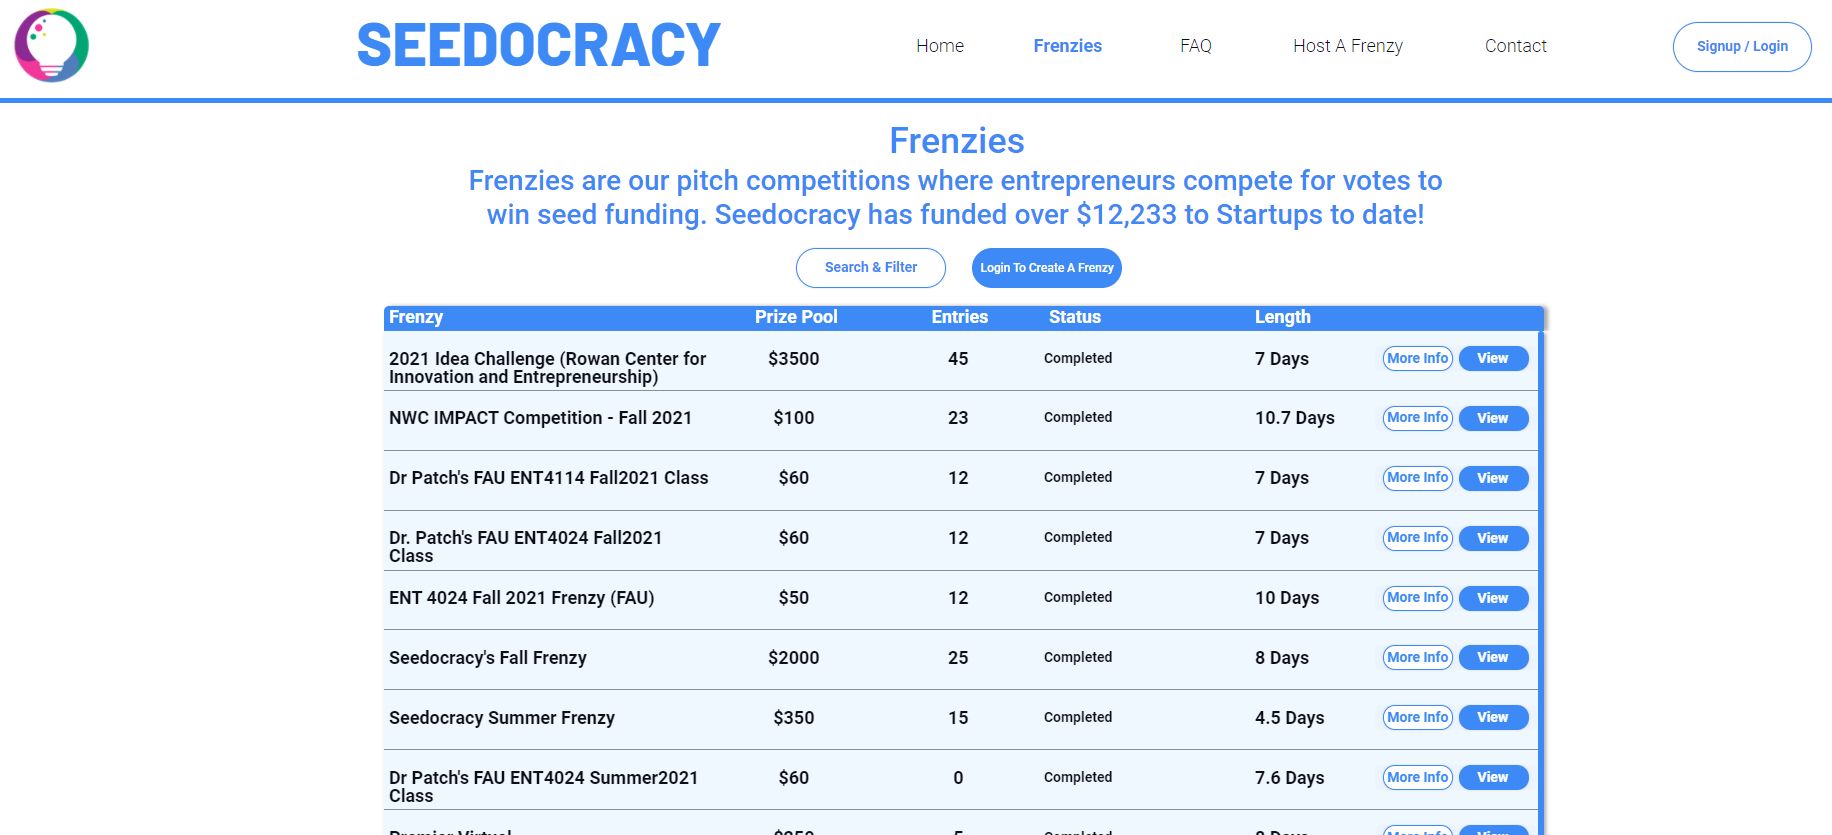 A view of recent pitch competitions hosted on Seedocracy